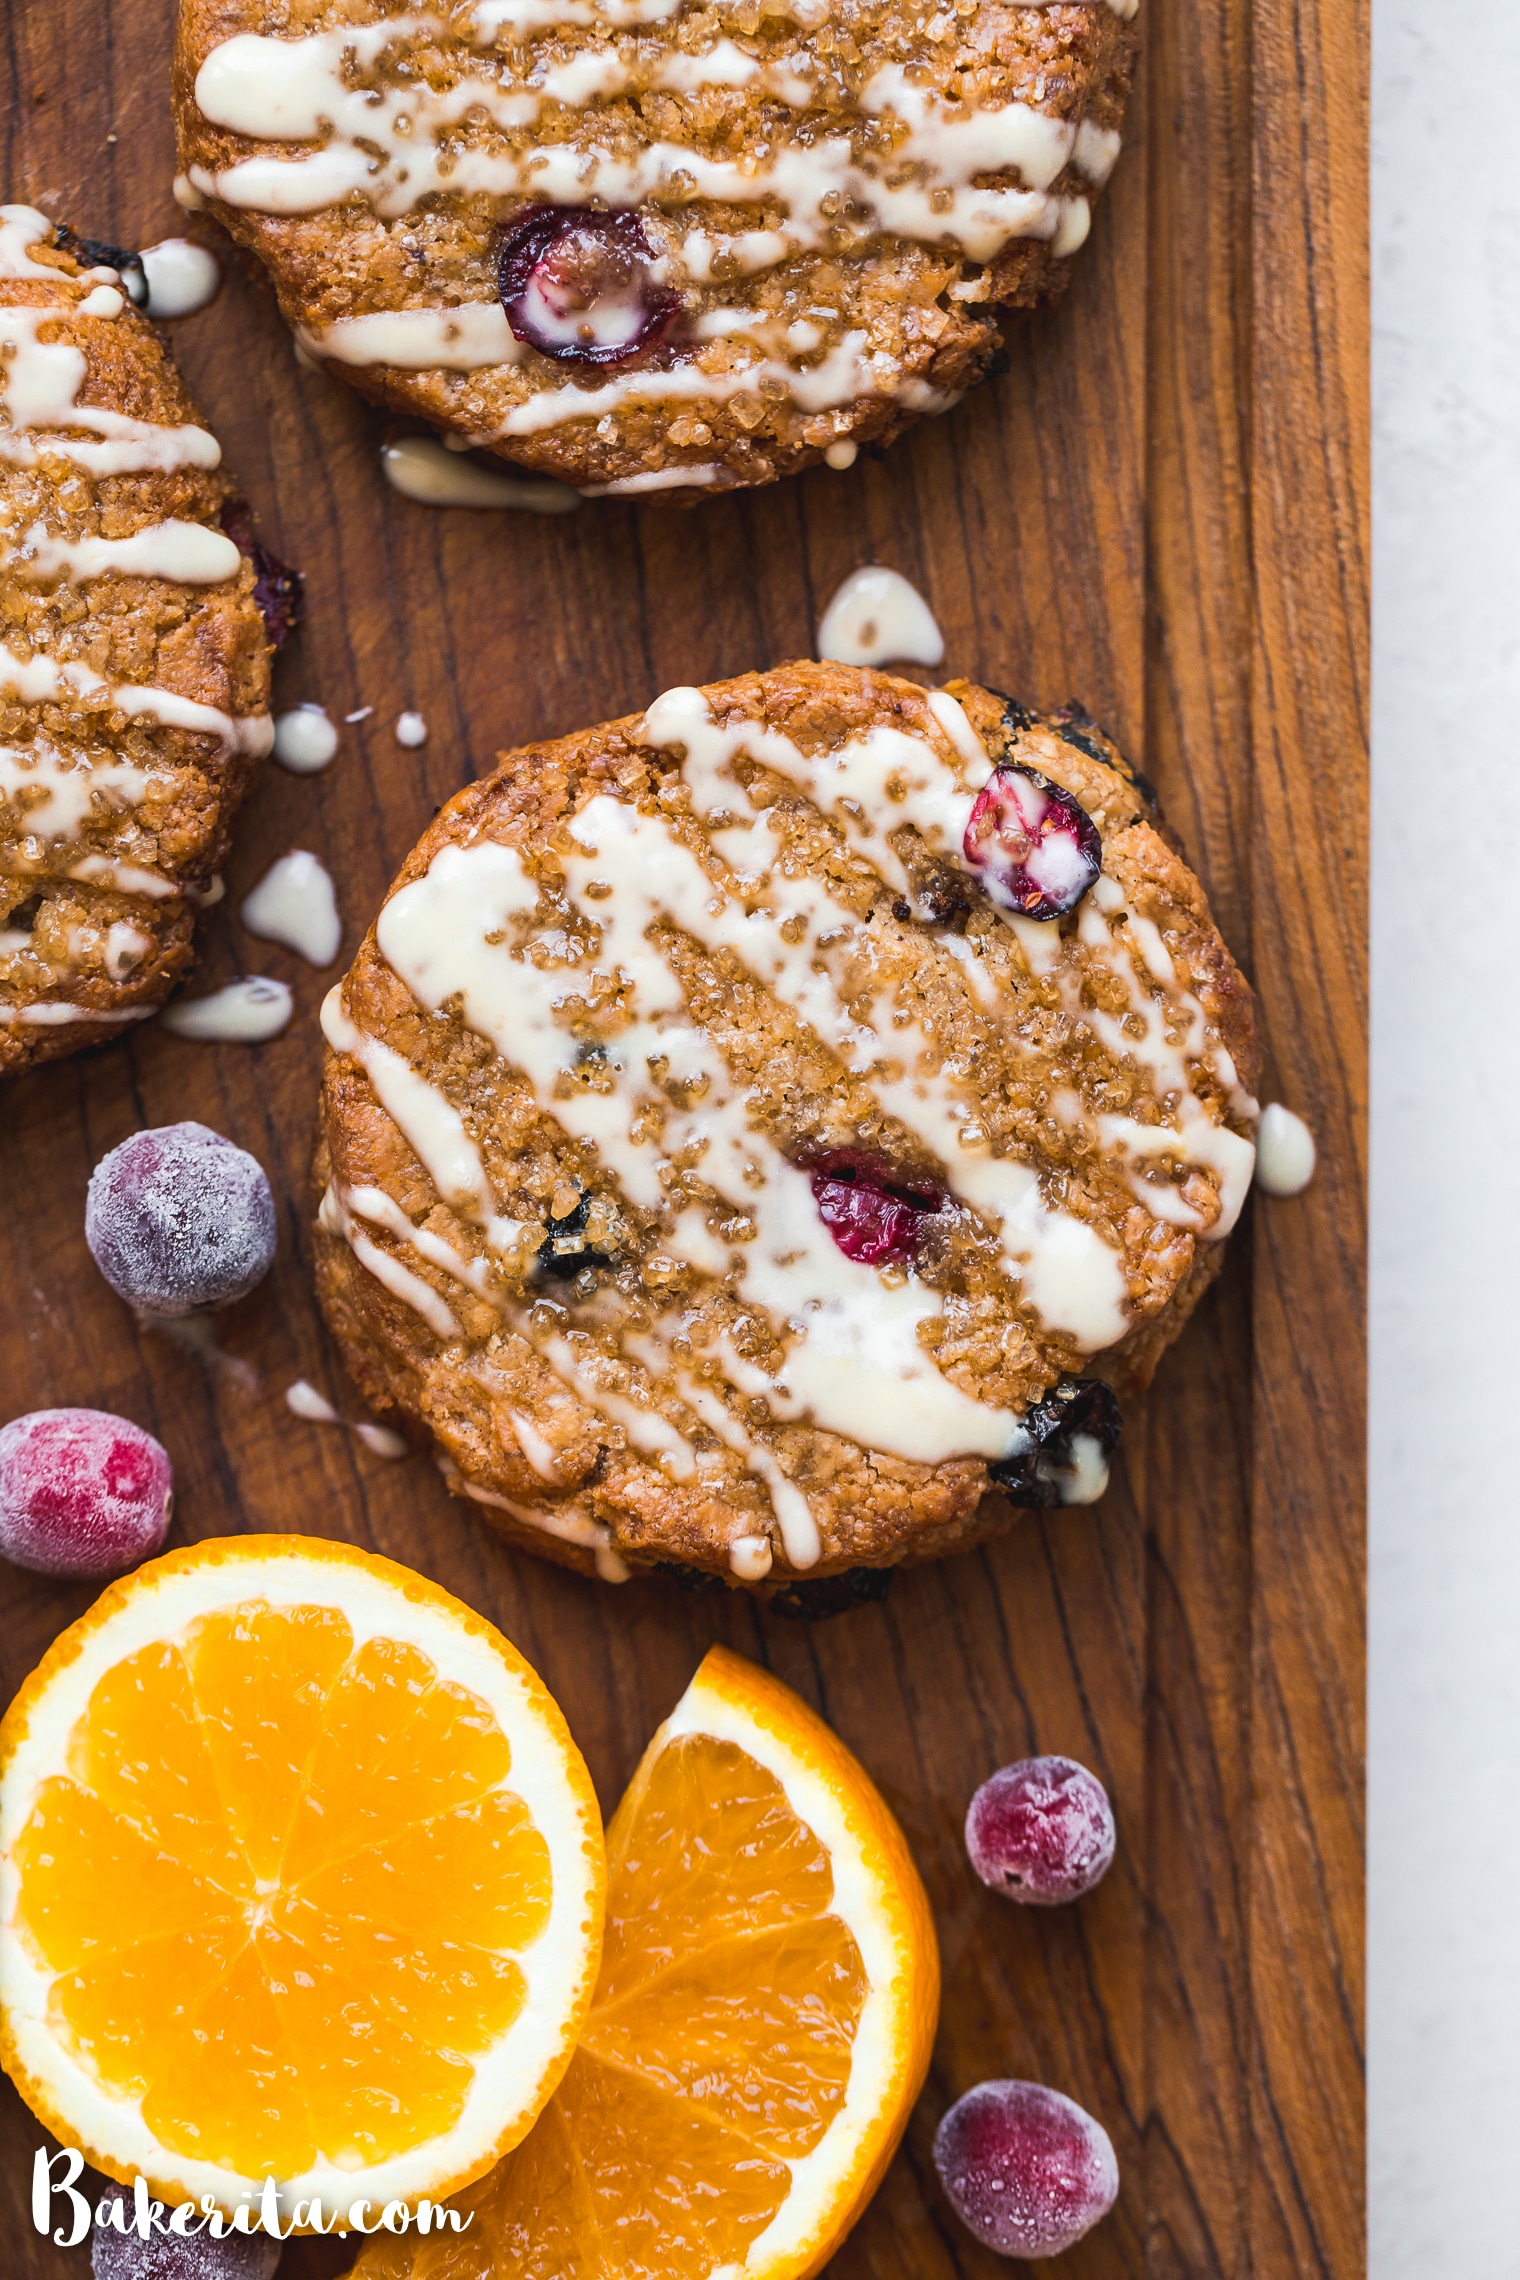 These Gluten-Free Vegan Cranberry Orange Scones will be your new favorite vegan breakfast. This easy scone recipe is made with fresh and dried cranberries, fresh orange juice and zest, and a simple orange glaze for maximum flavor.